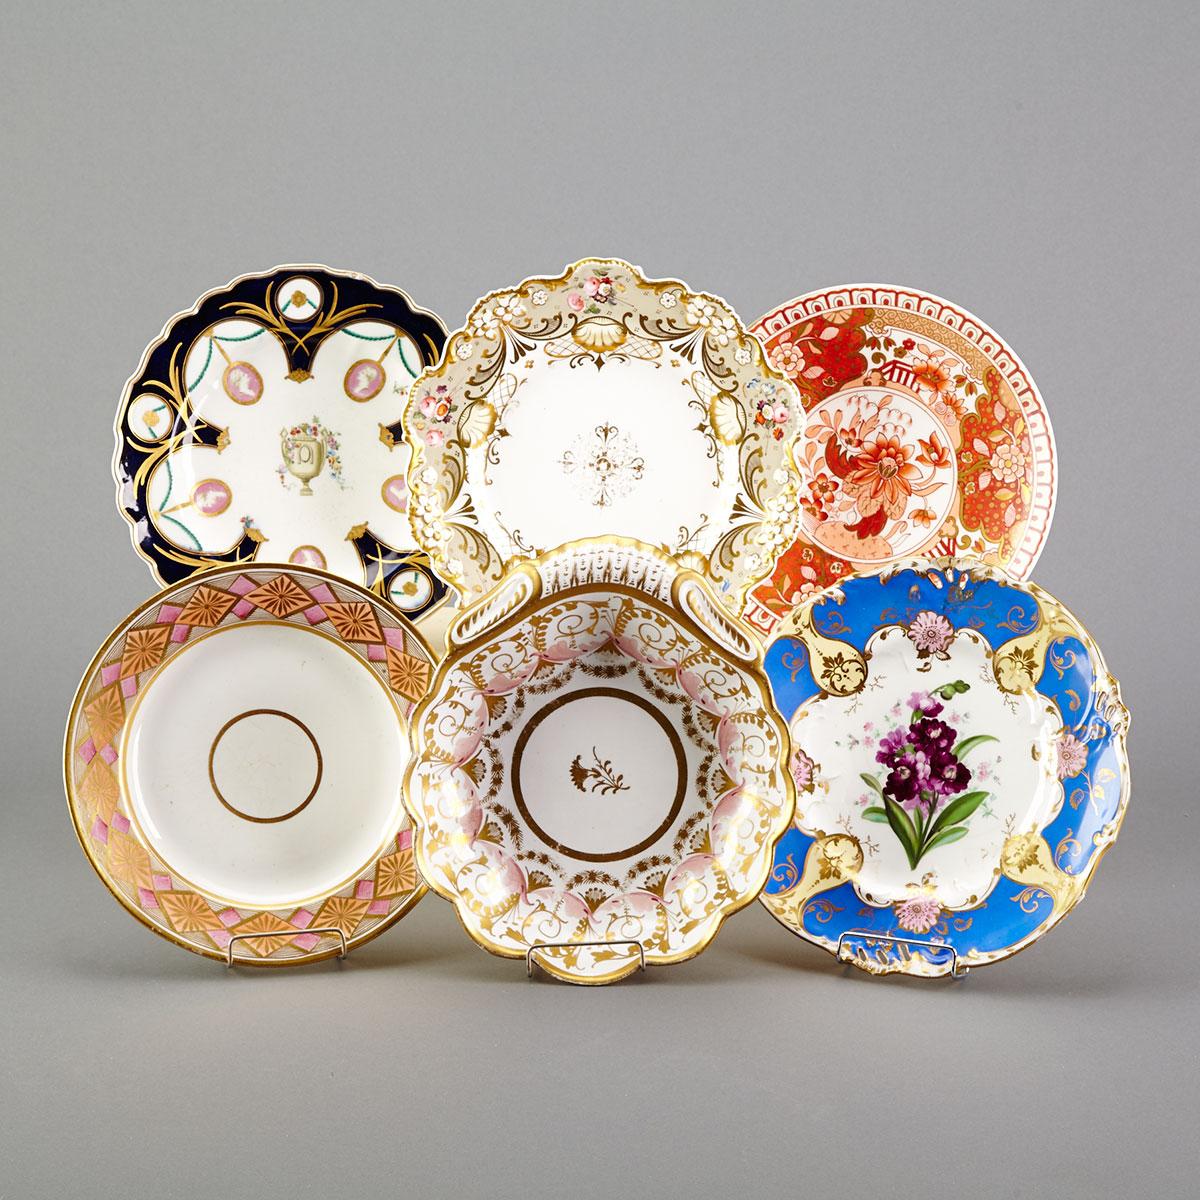 Five English Porcelain Plates and a Shell Dish, late 18th/early 19th century